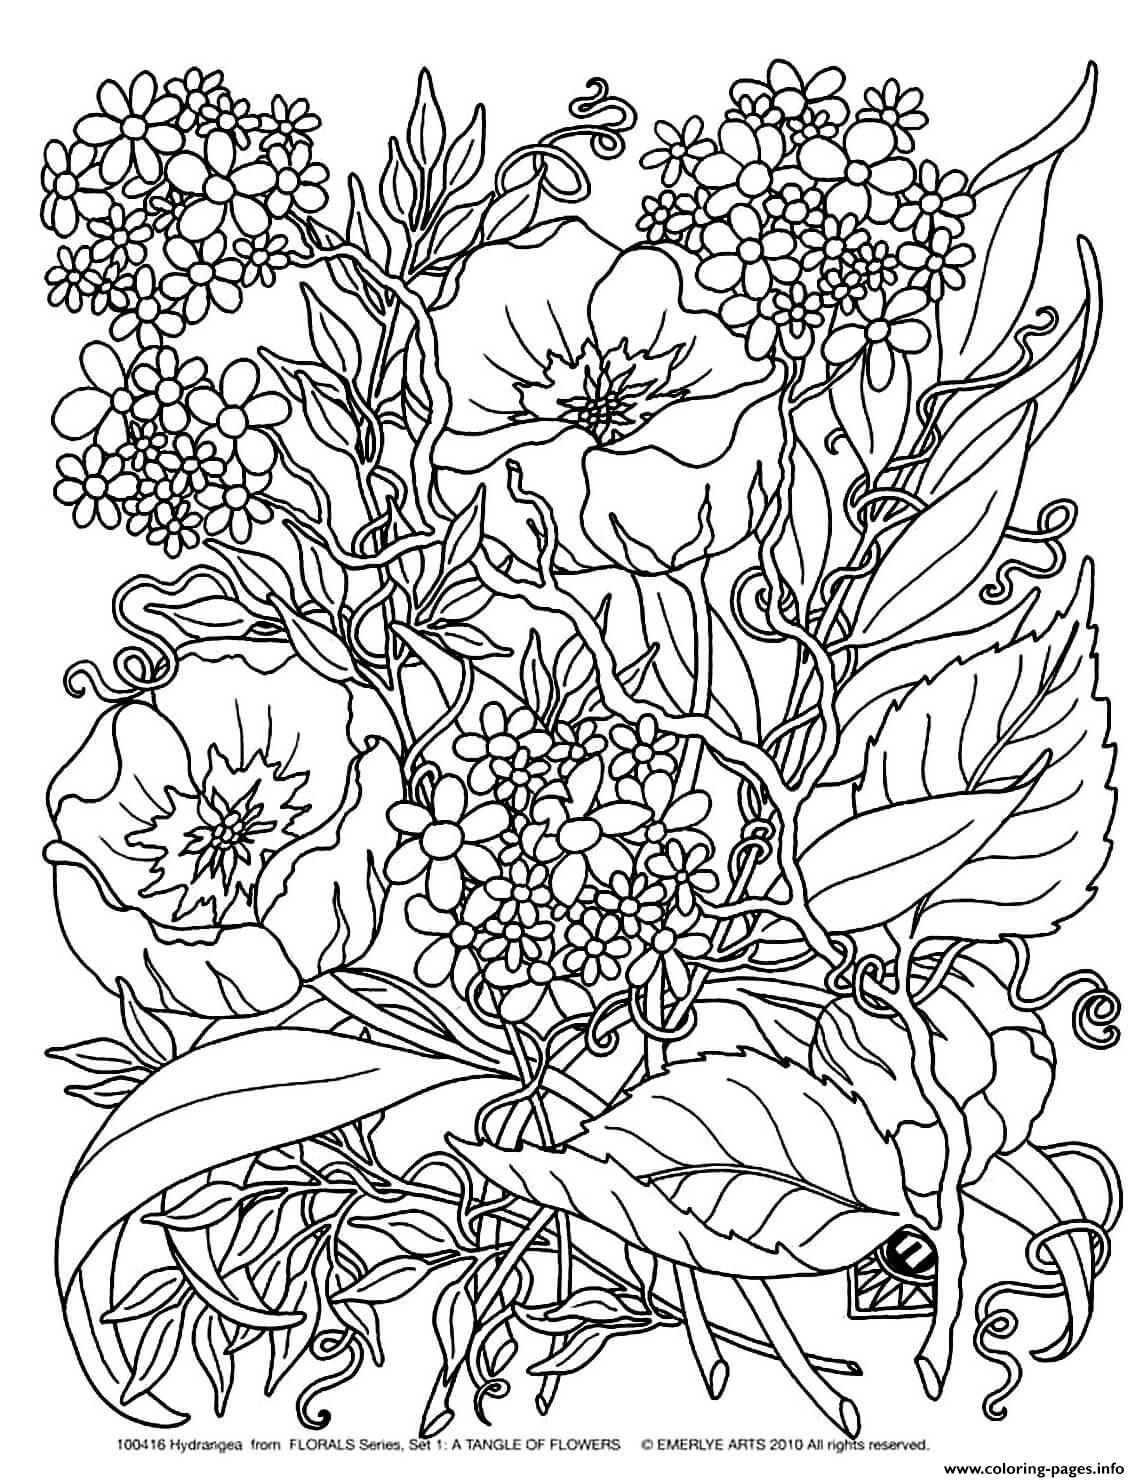 flower garden coloring pages for adults